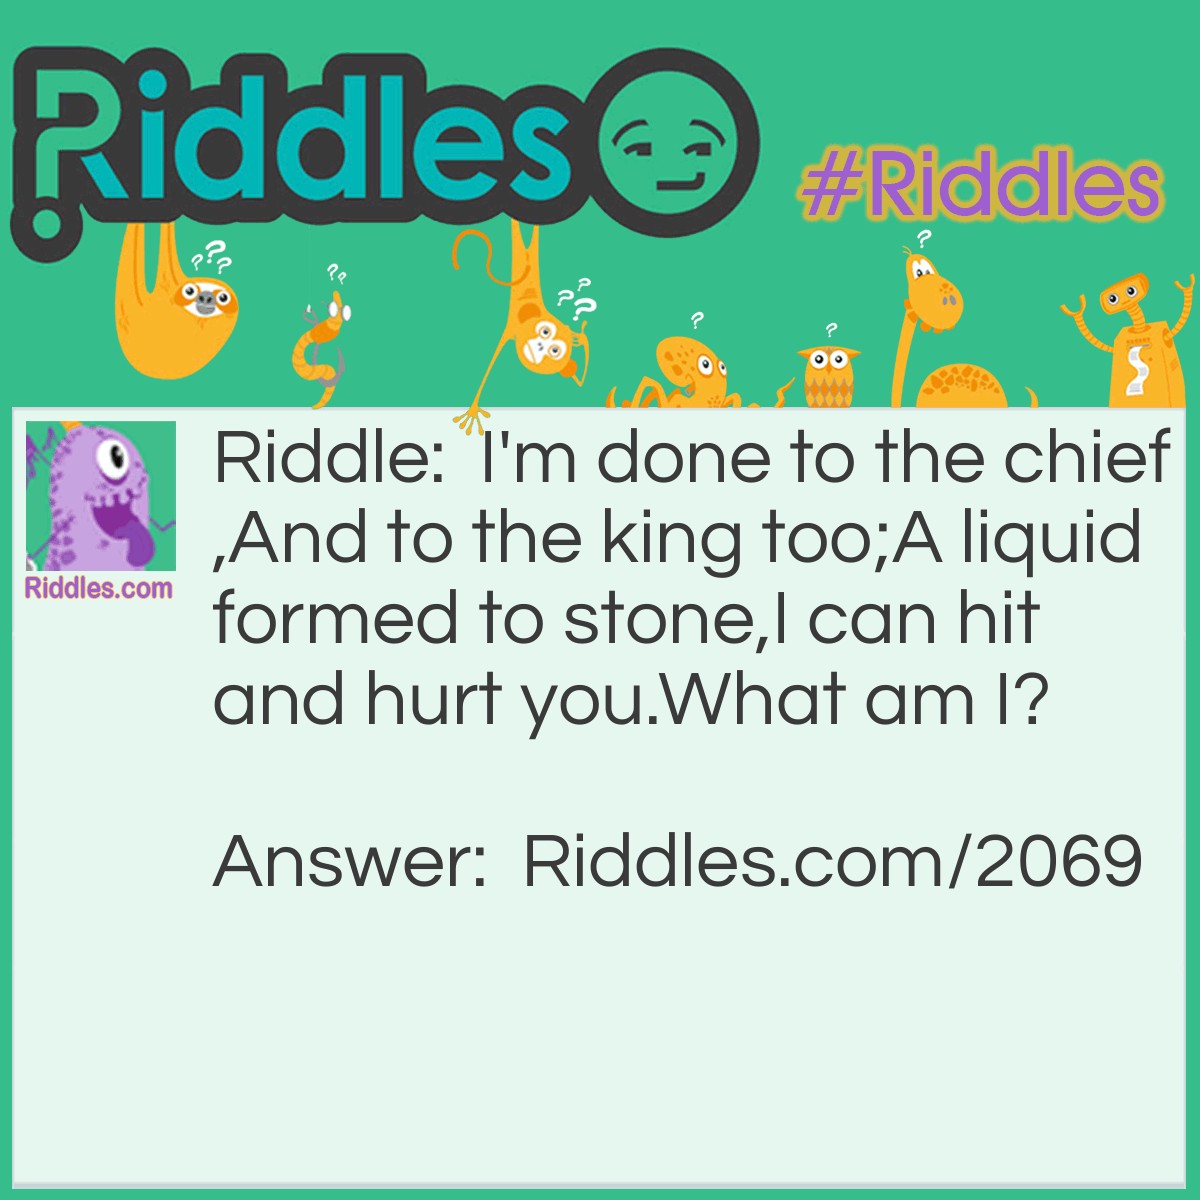 Riddle: I'm done to the chief,
And to the king too;
A liquid formed to stone,
I can hit and hurt you.
What am I? Answer: Hail